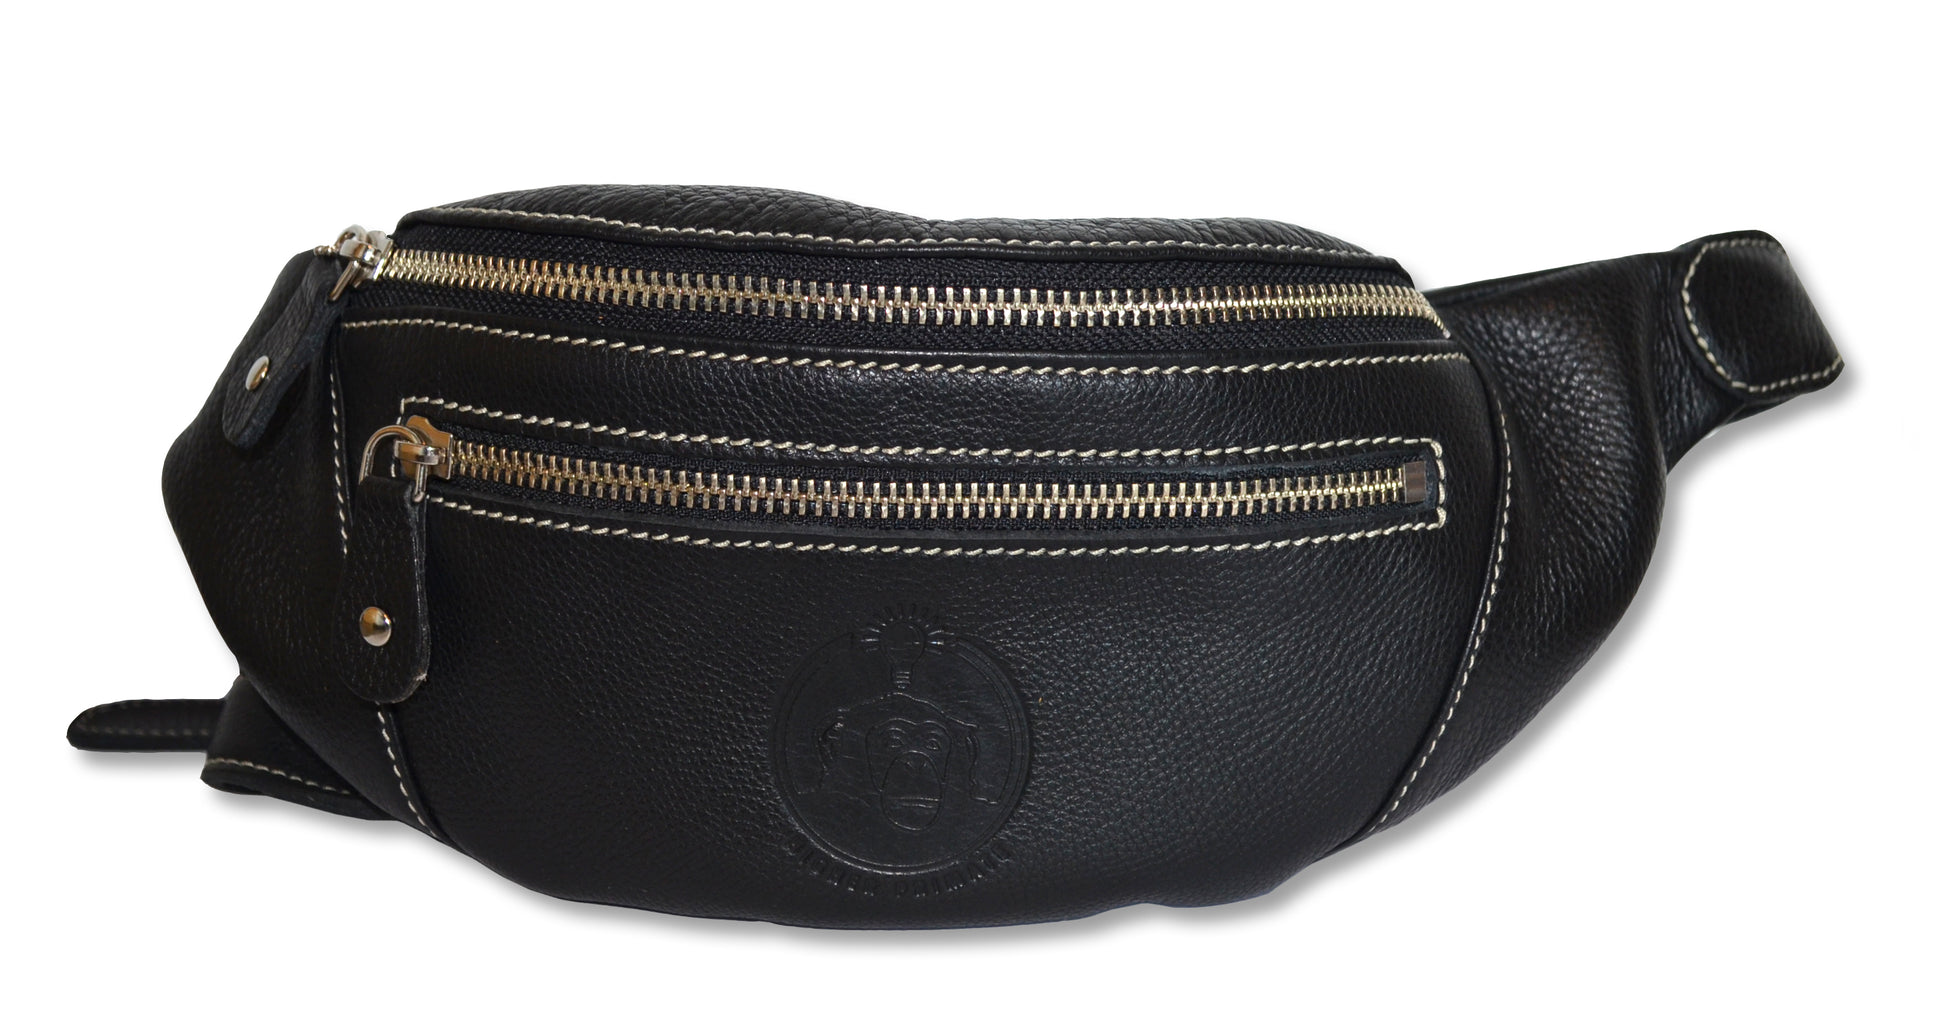 Black Fanny Pack for Women.leather Crossbody Fanny Pack -  Canada